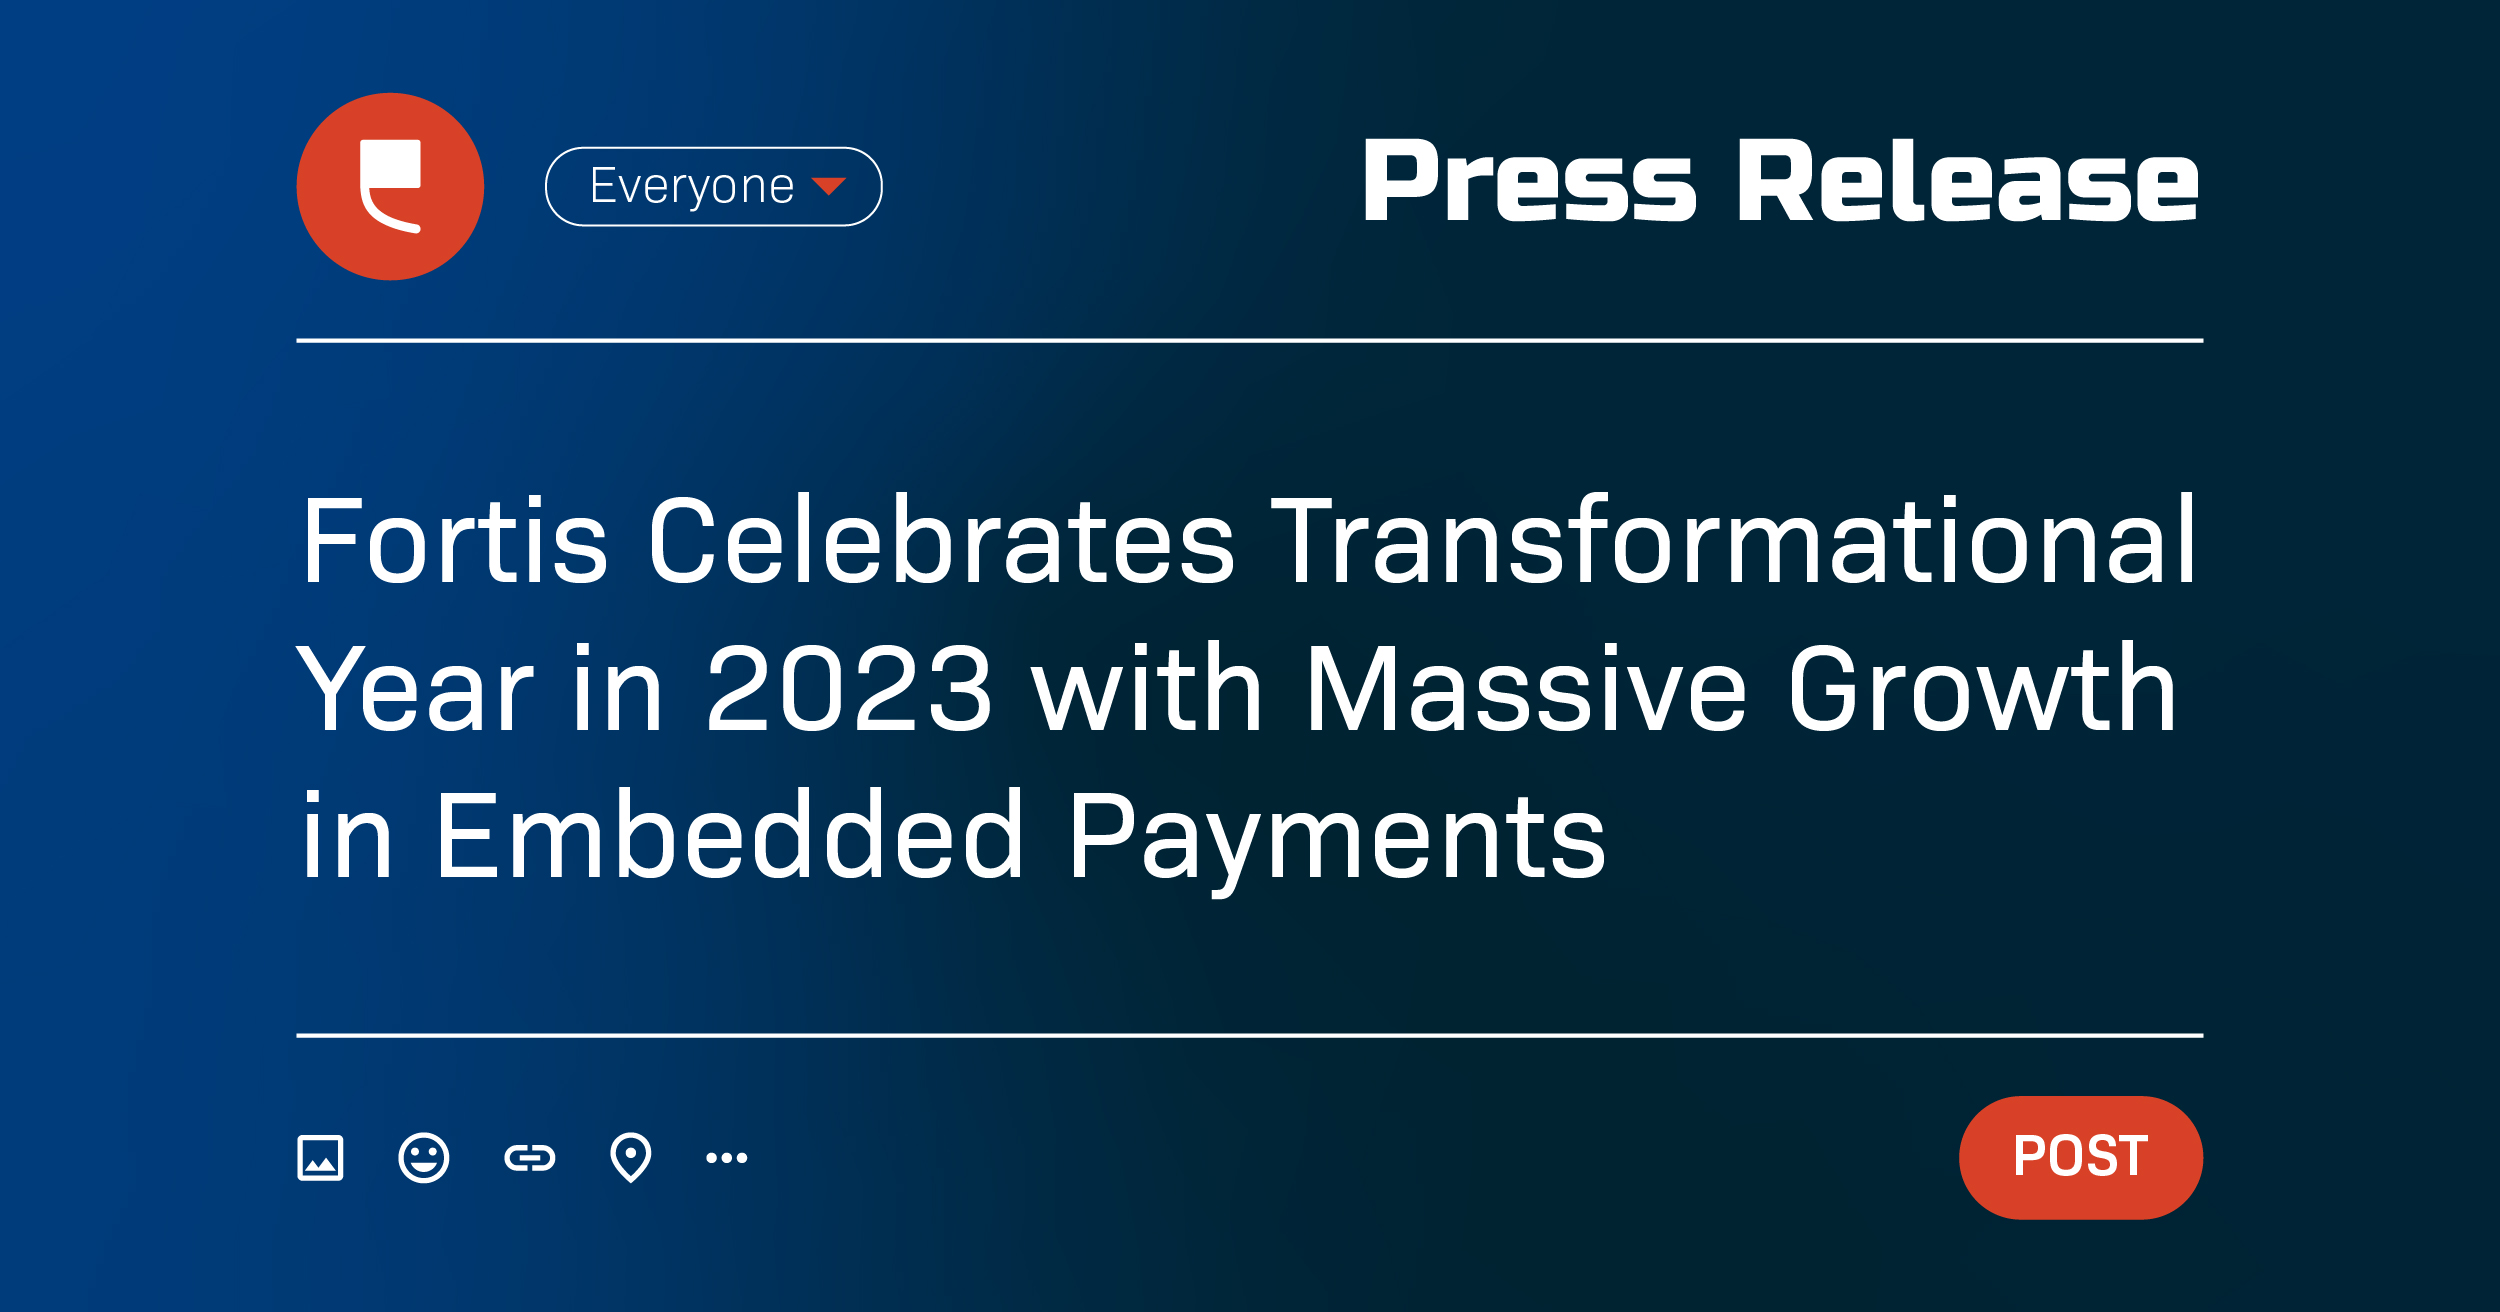 Fortis Celebrates Transformational Year in 2023 with Massive Growth in Embedded Payments  - Featured Image